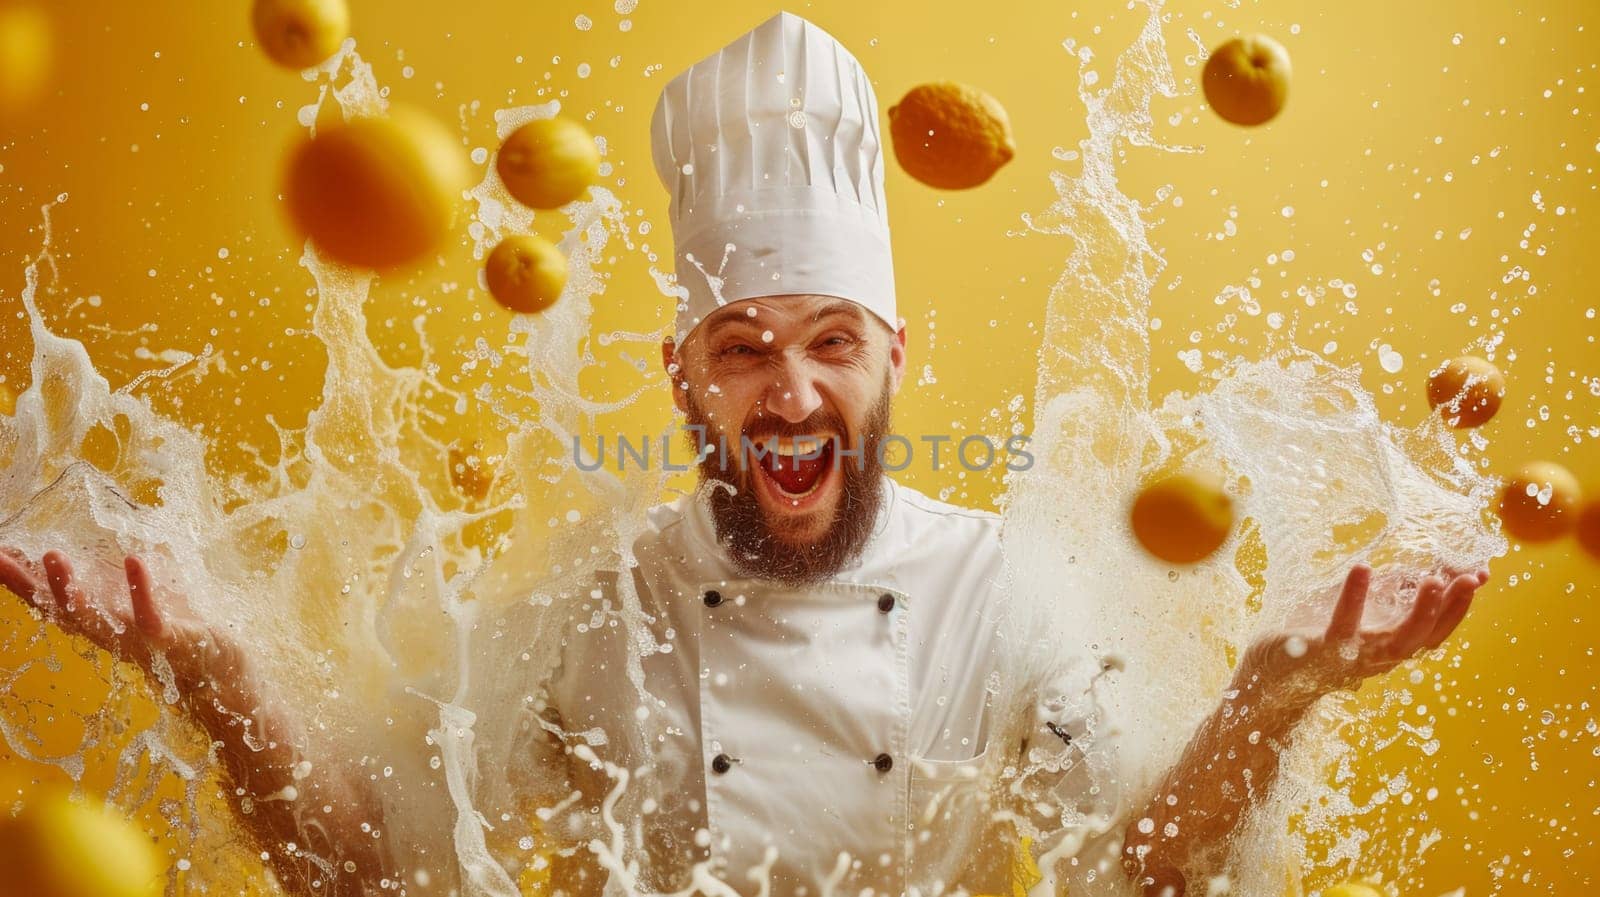 A chef in a white hat splashing water on his face